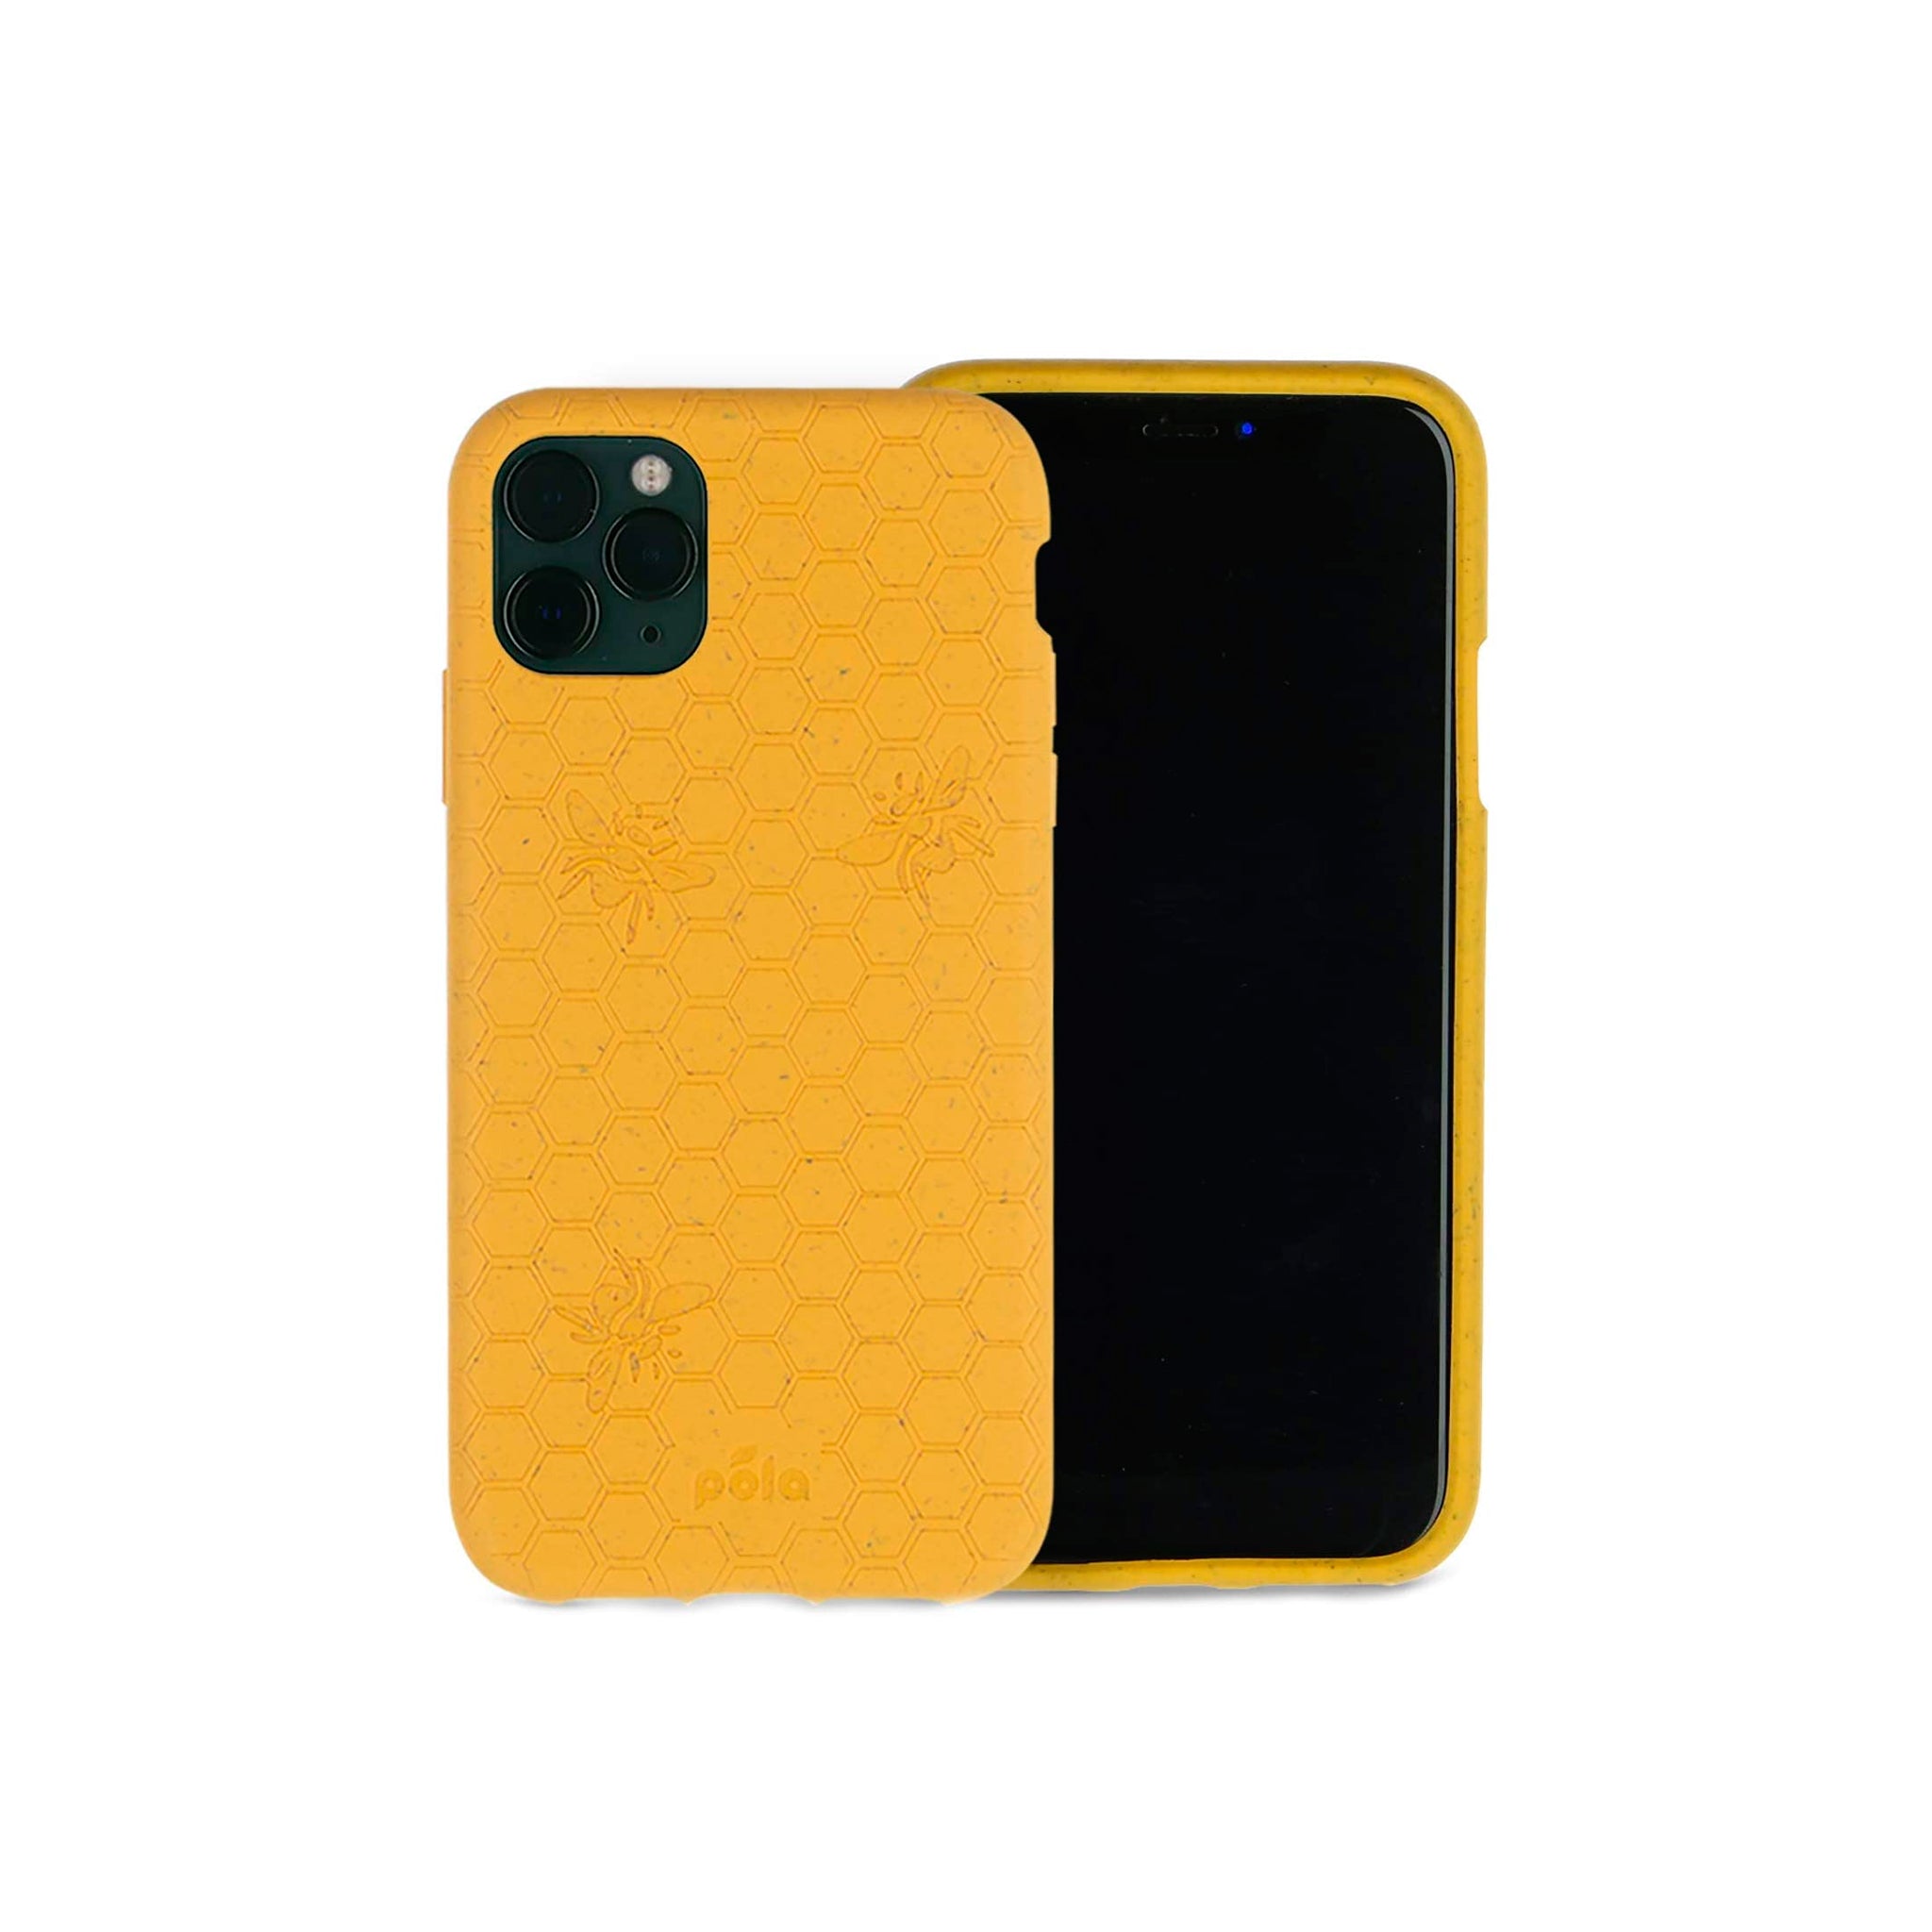 Pela - Eco Friendly Case For Apple Iphone 11 Pro Max - Honey Bee Edition